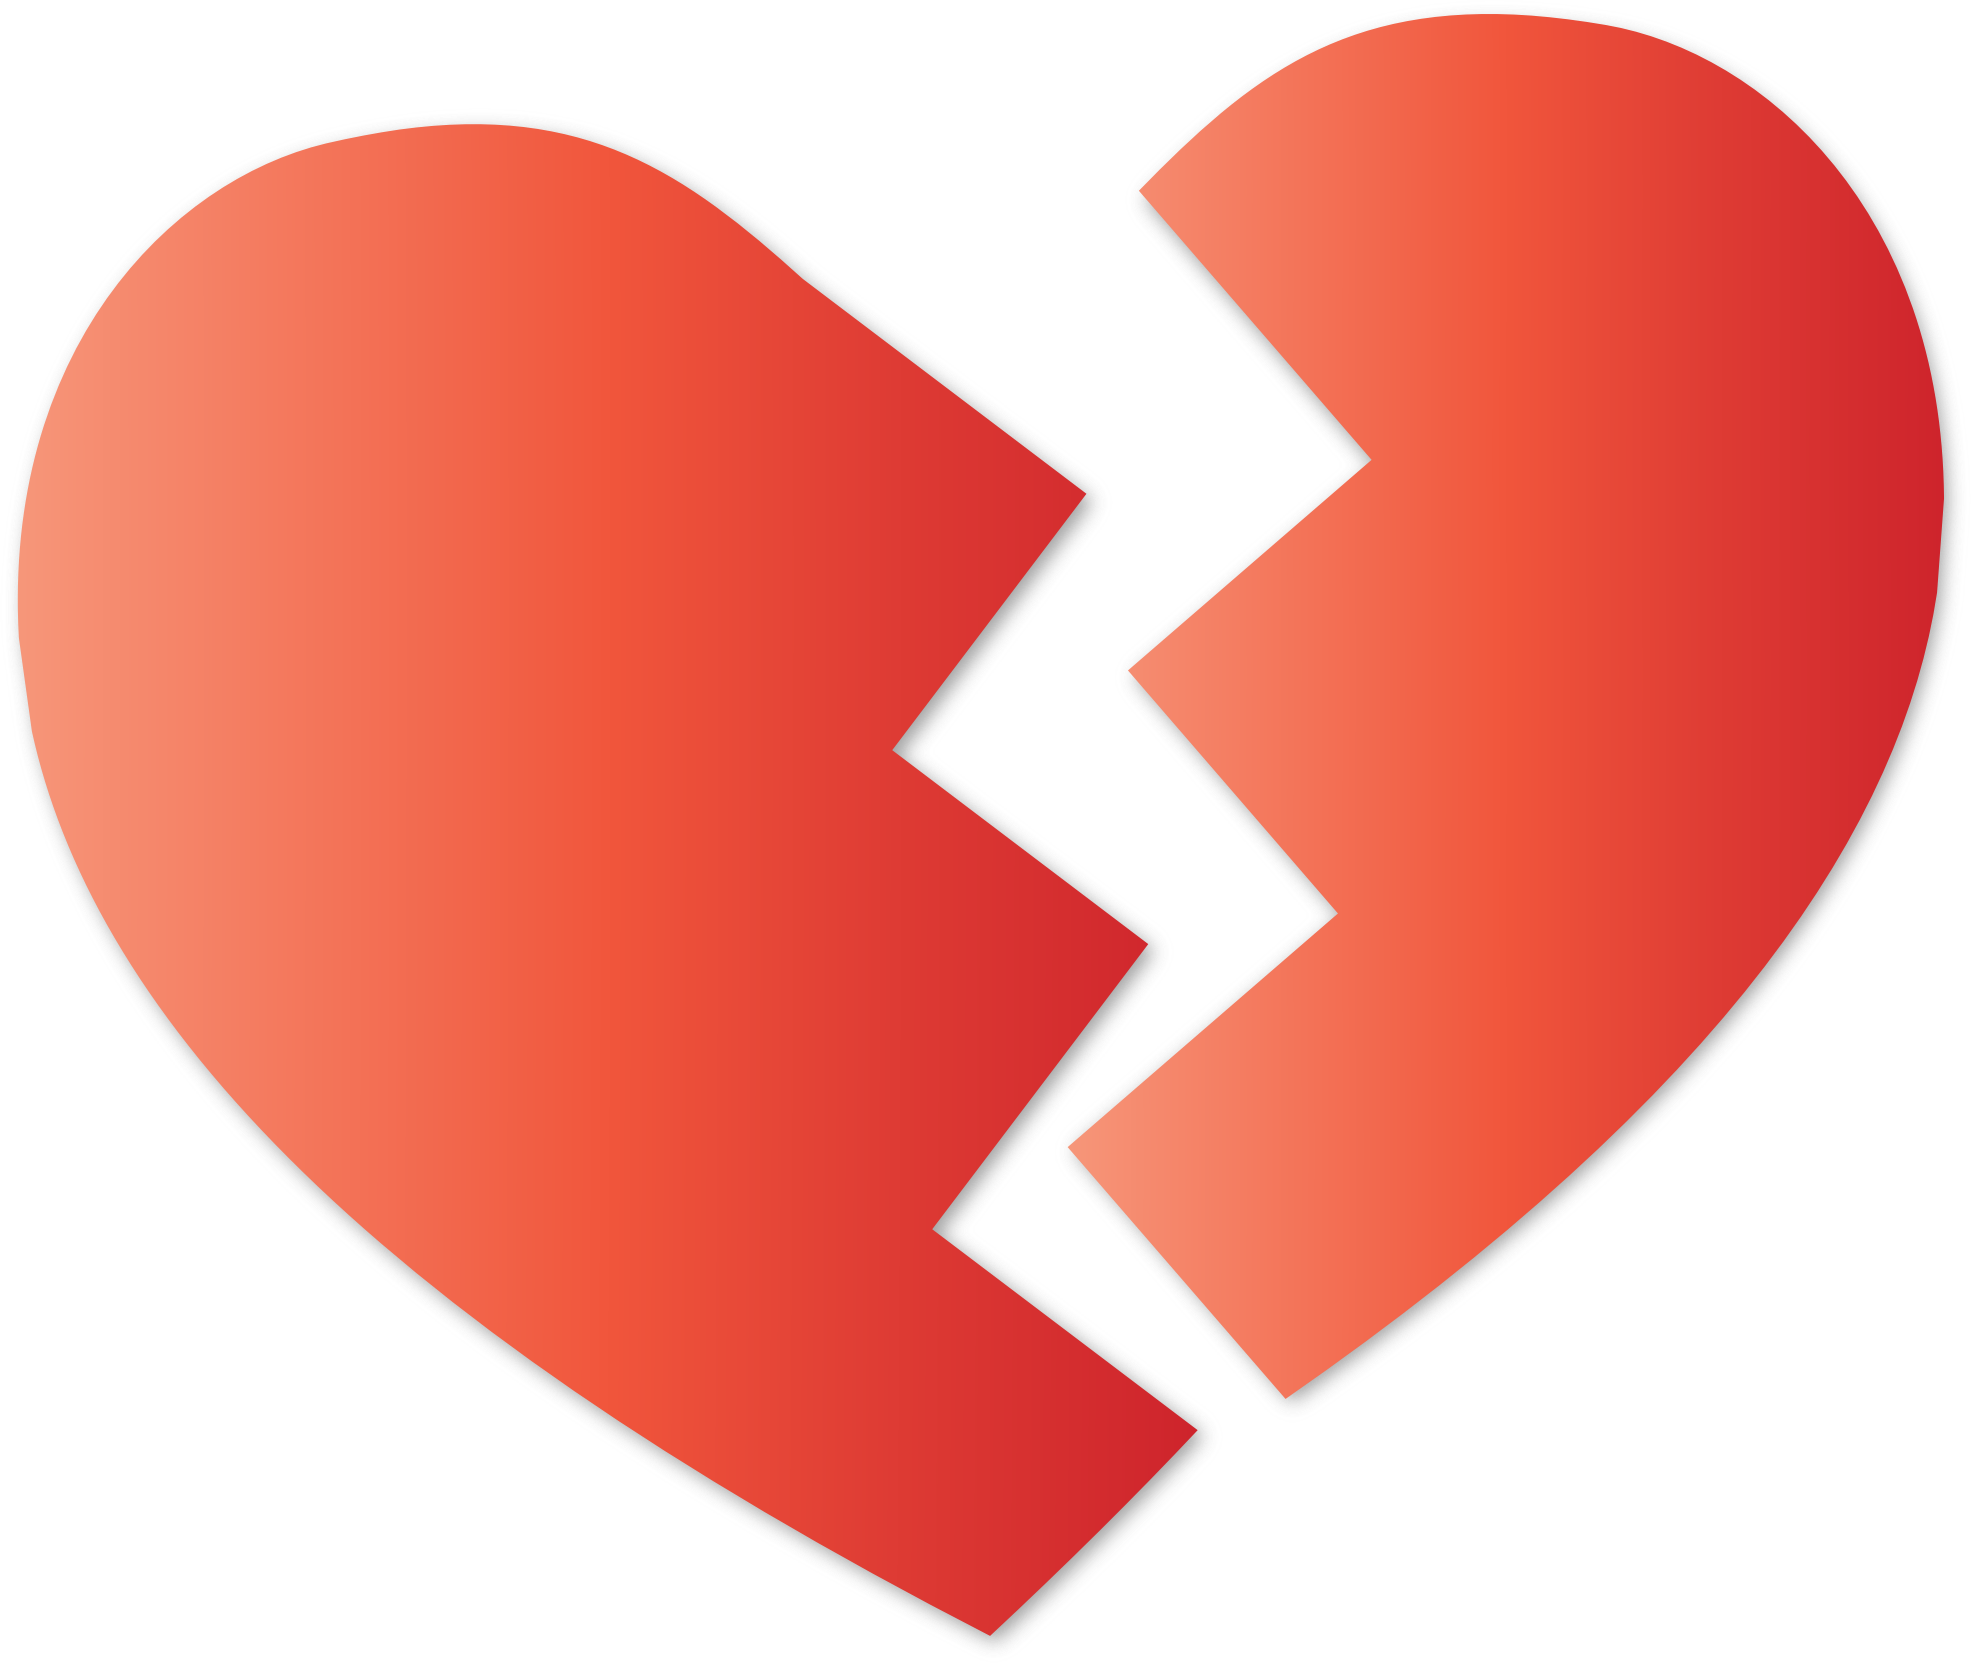 Heart Png Images With Transparent Background